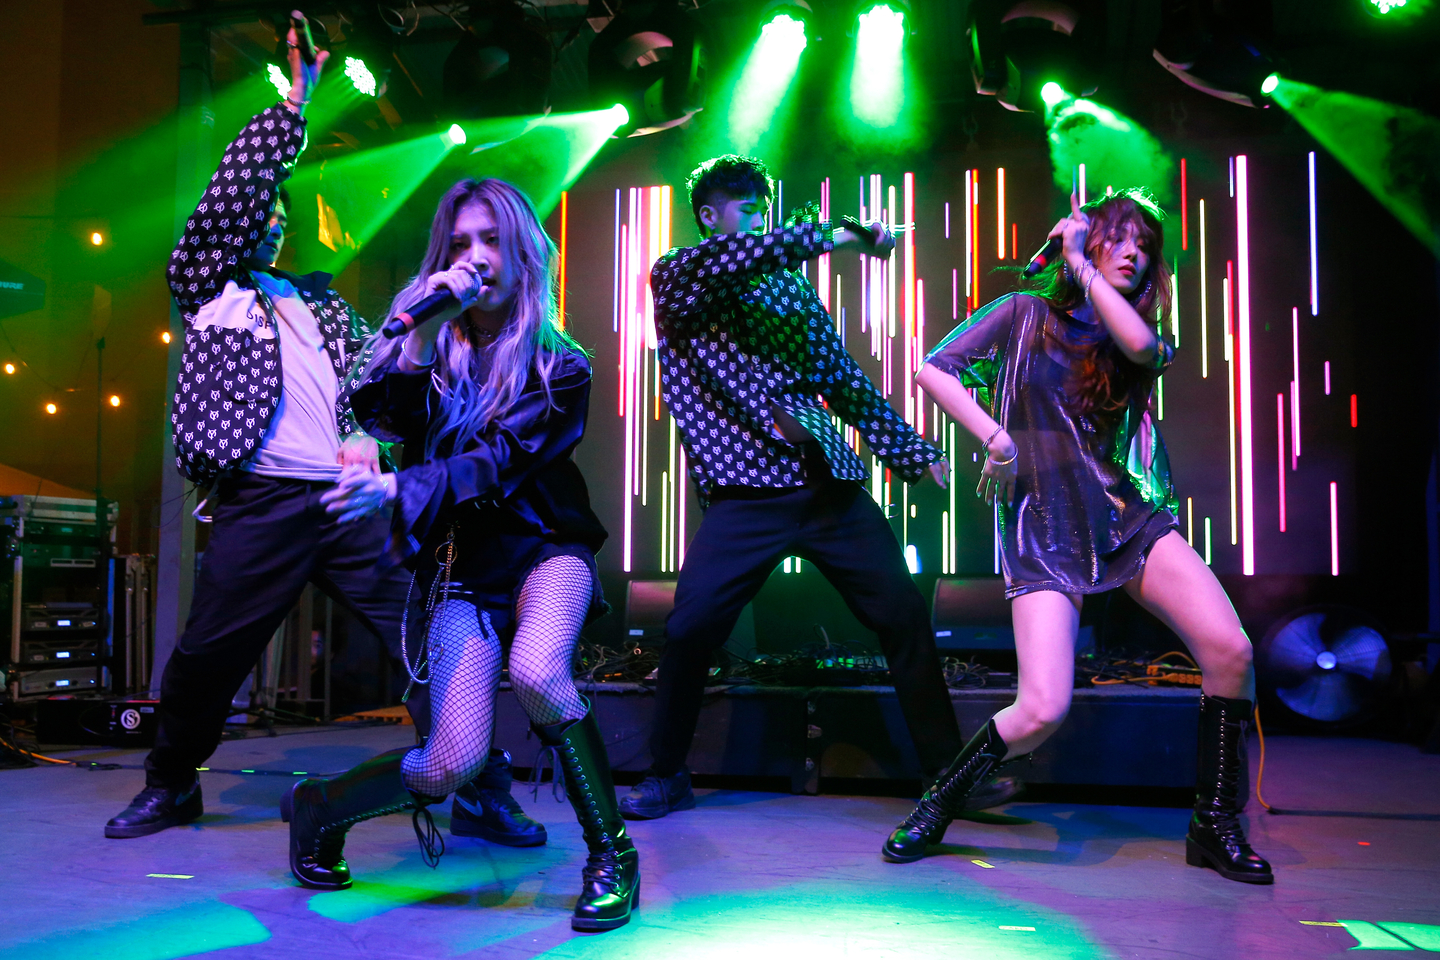 KARD performed at the Korea Spotlight show at The Belmont on March 16, 2018 in Austin, Texas. Photo by Steve Rogers Photography/Getty Images for SXSW